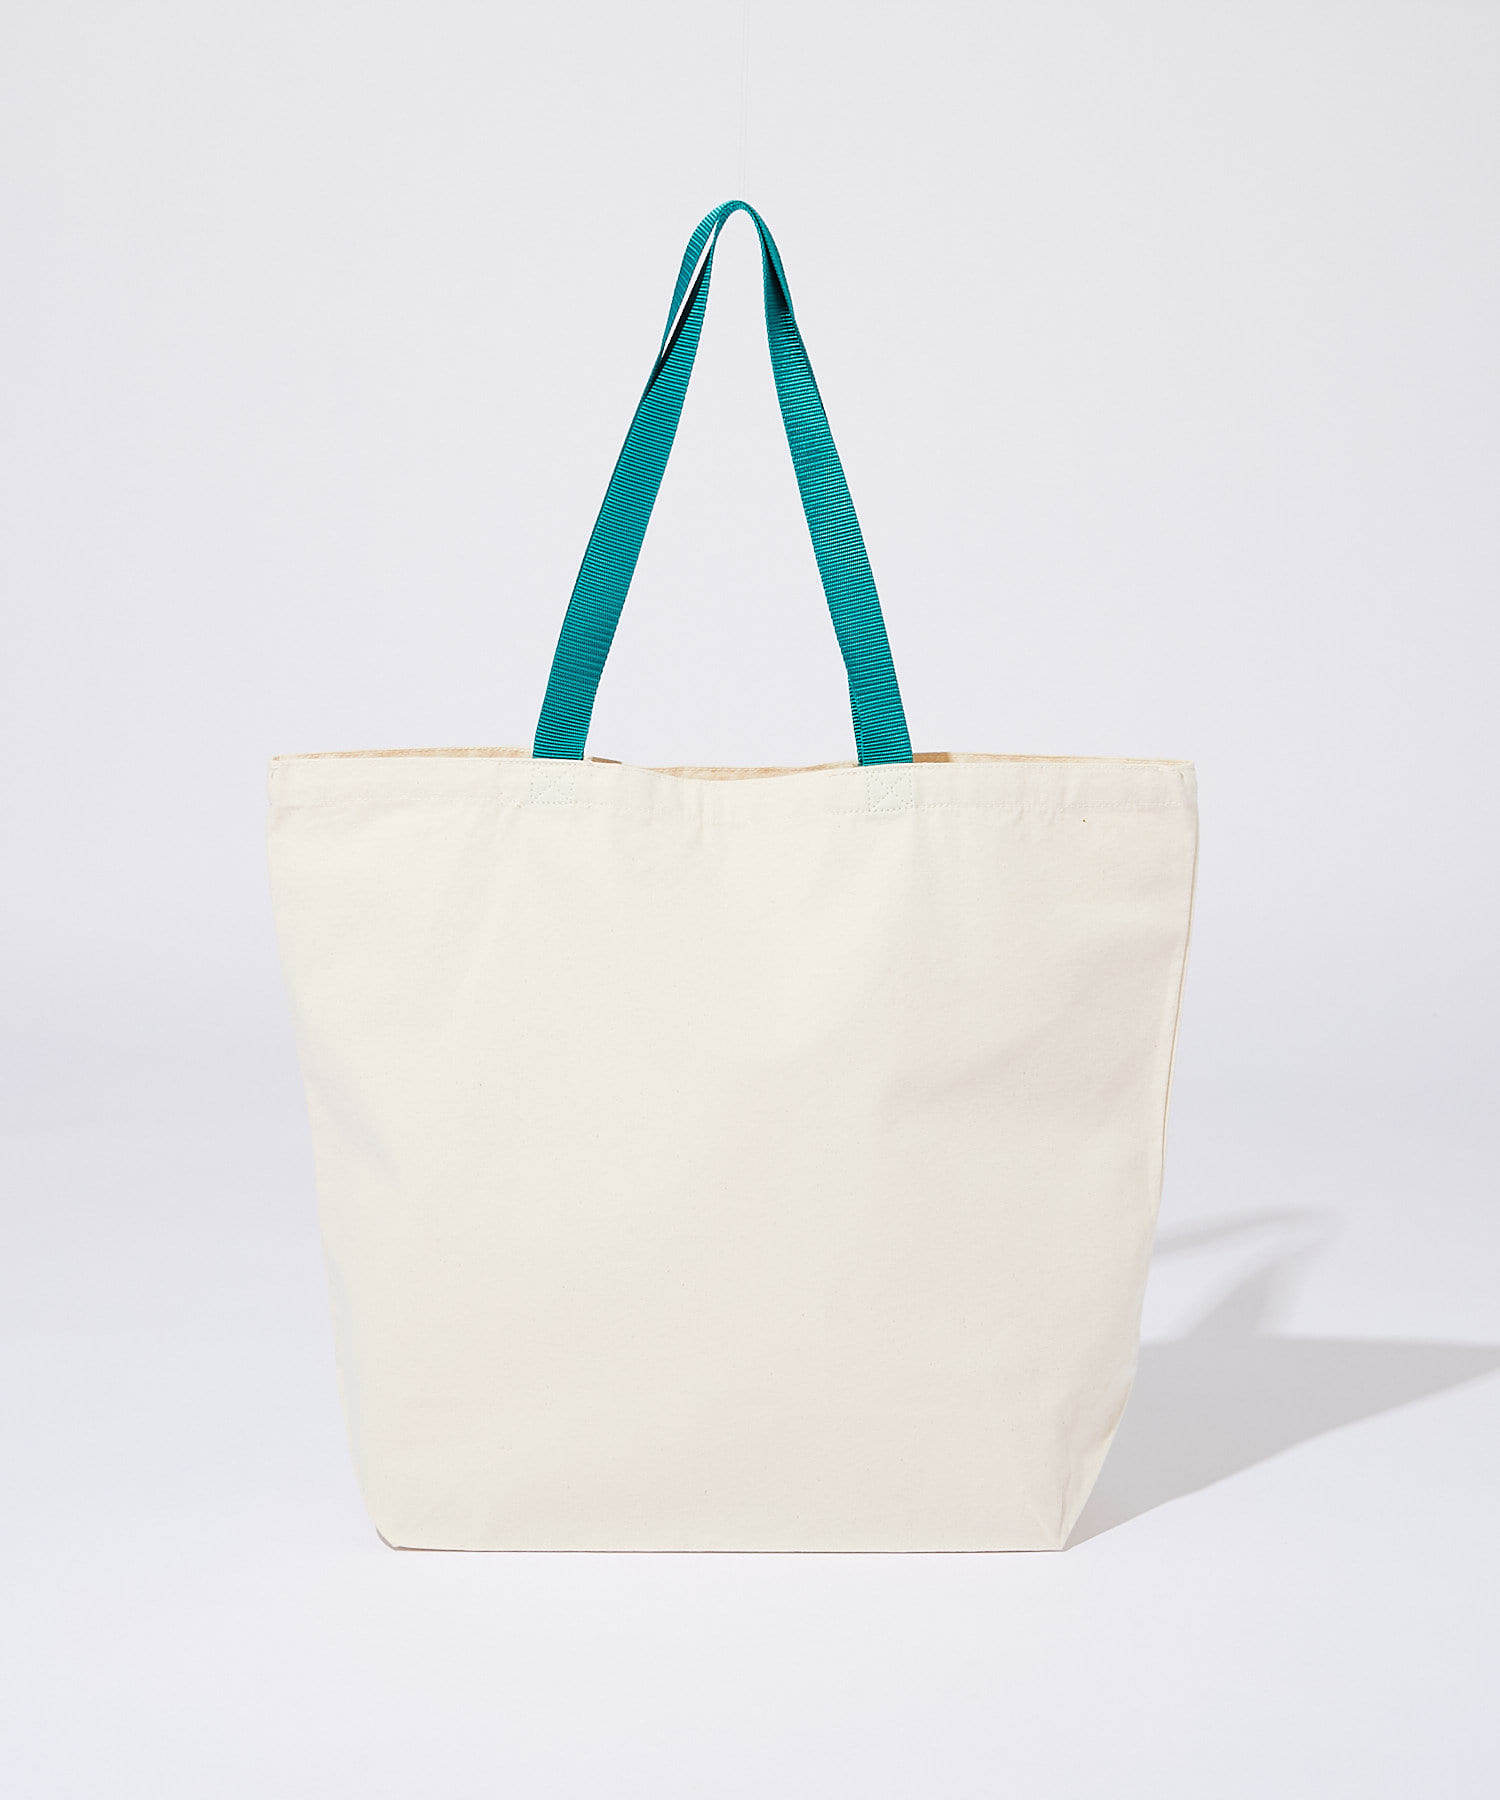 WHO’S WHO gallery(フーズフーギャラリー) 【Sourcream/サワークリーム】Fishing TOTE